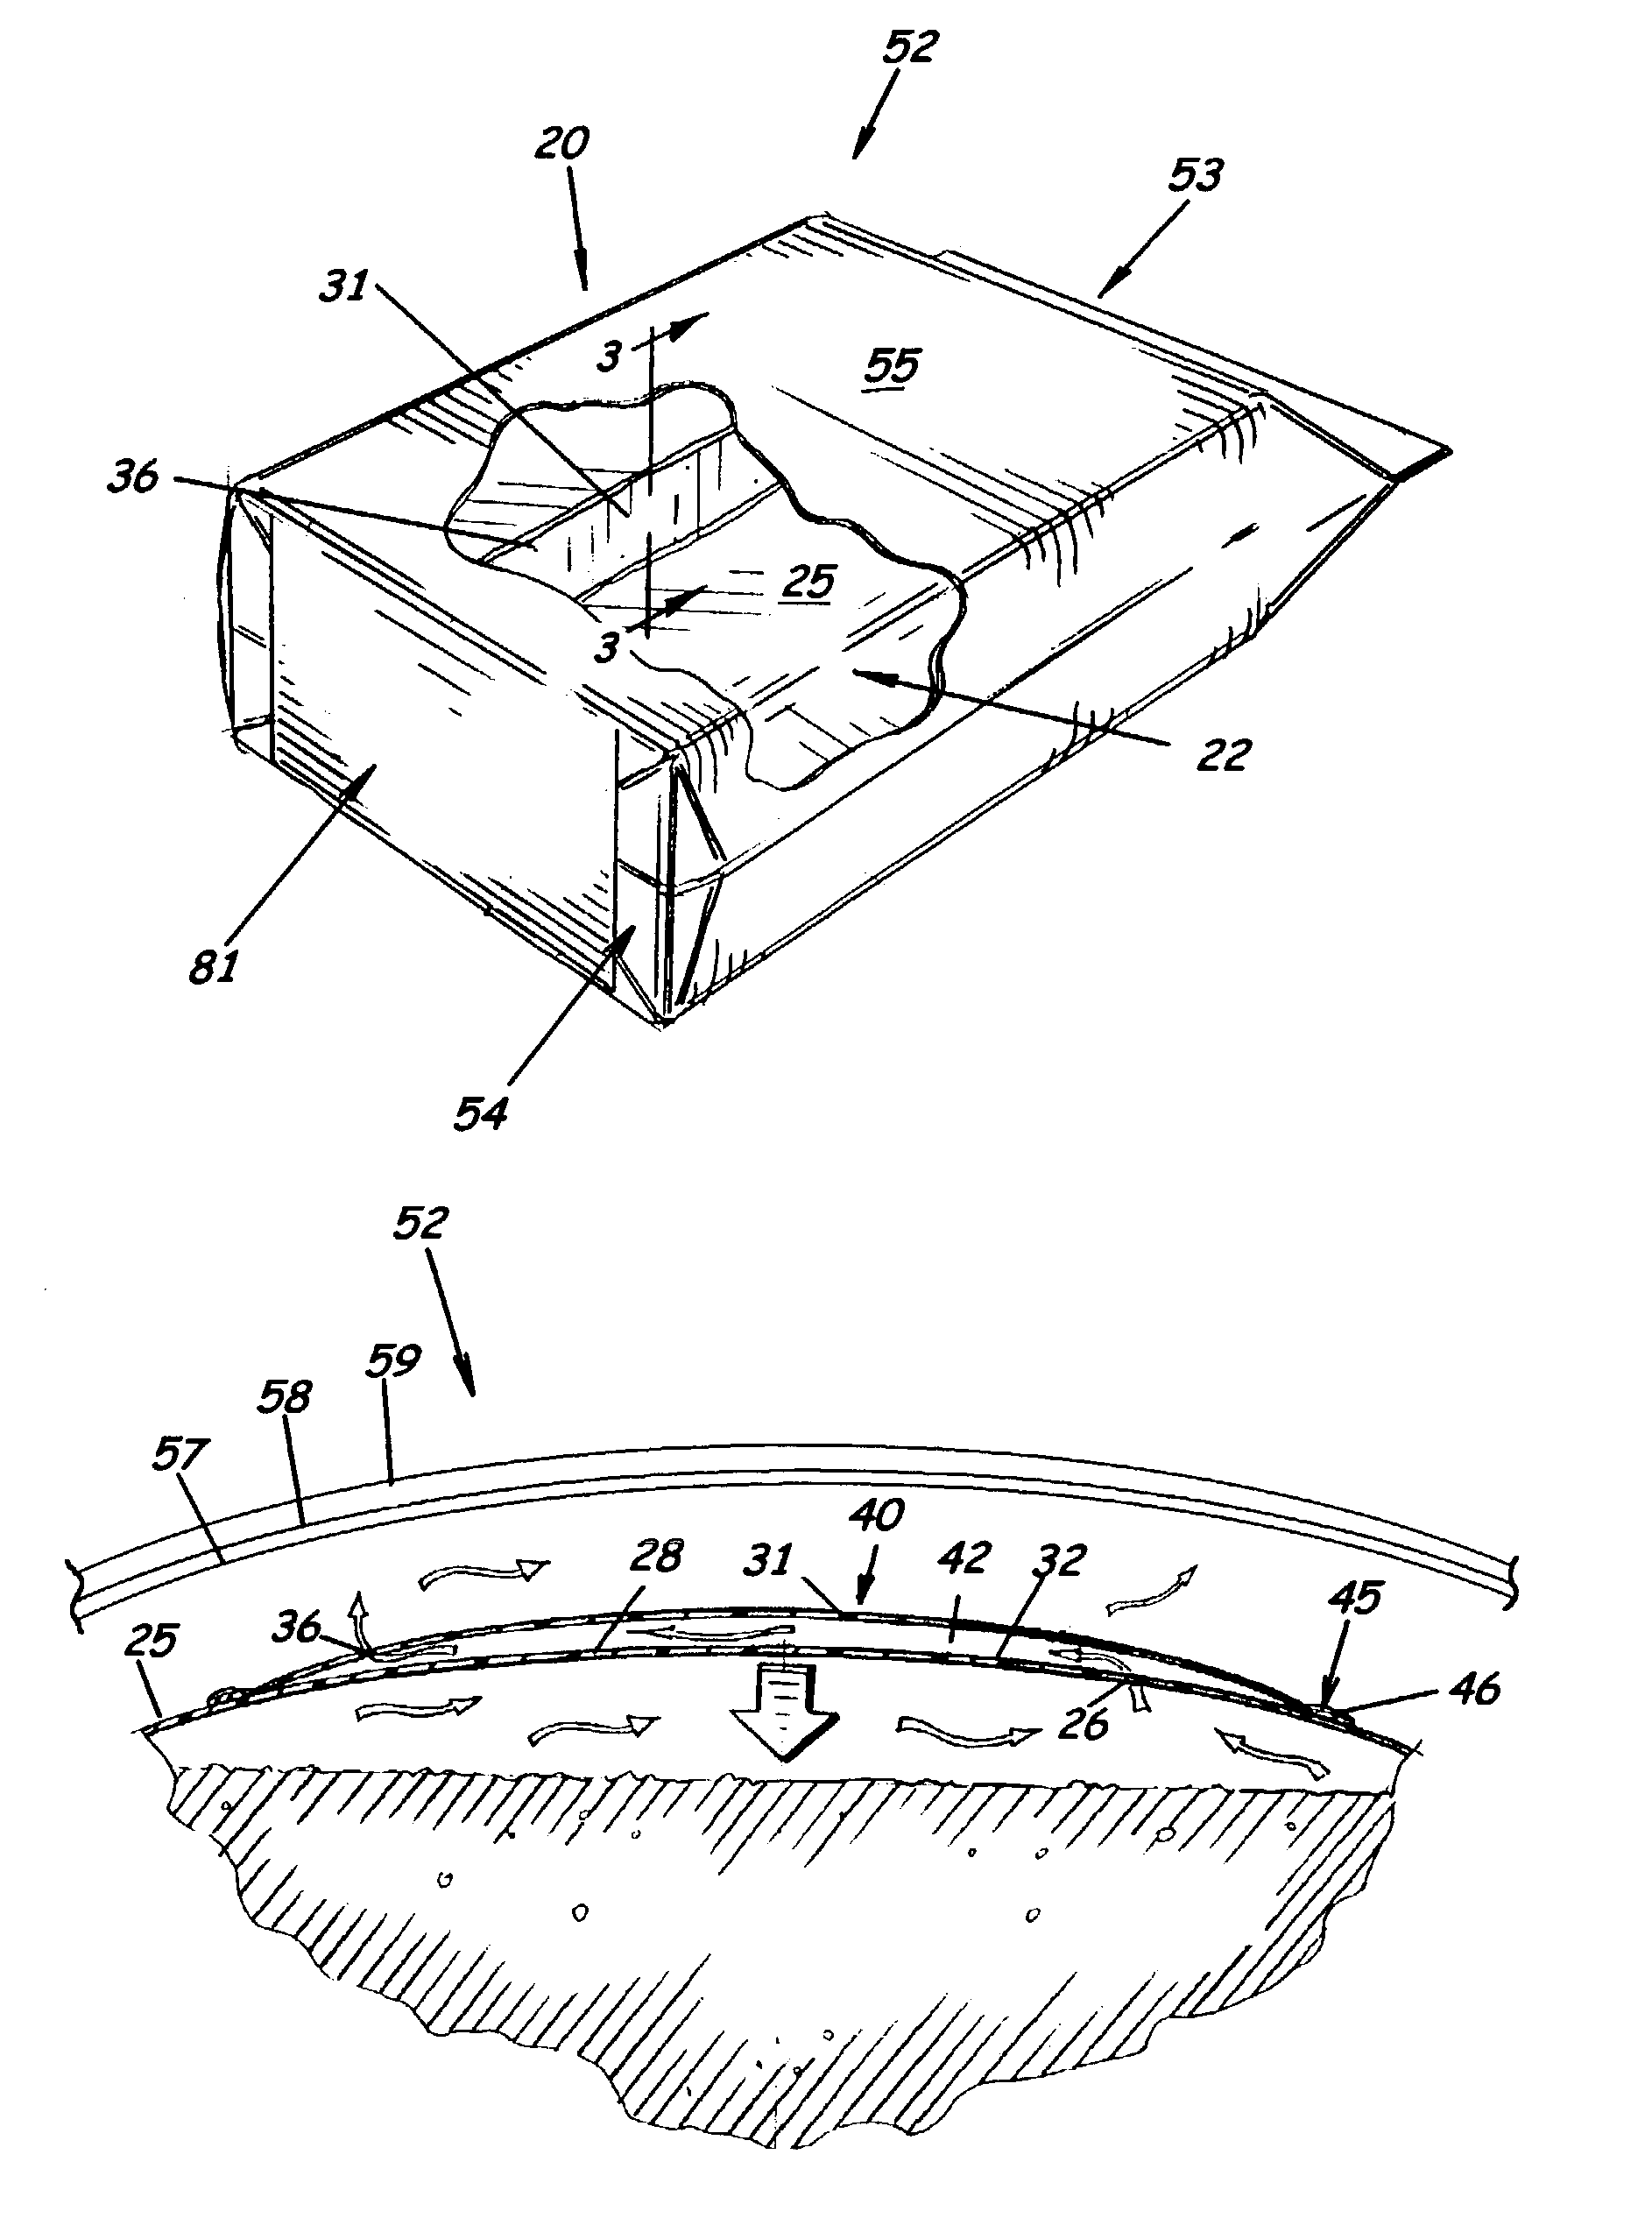 Multiwall vented bag, vented bag forming apparatus, and associated methods